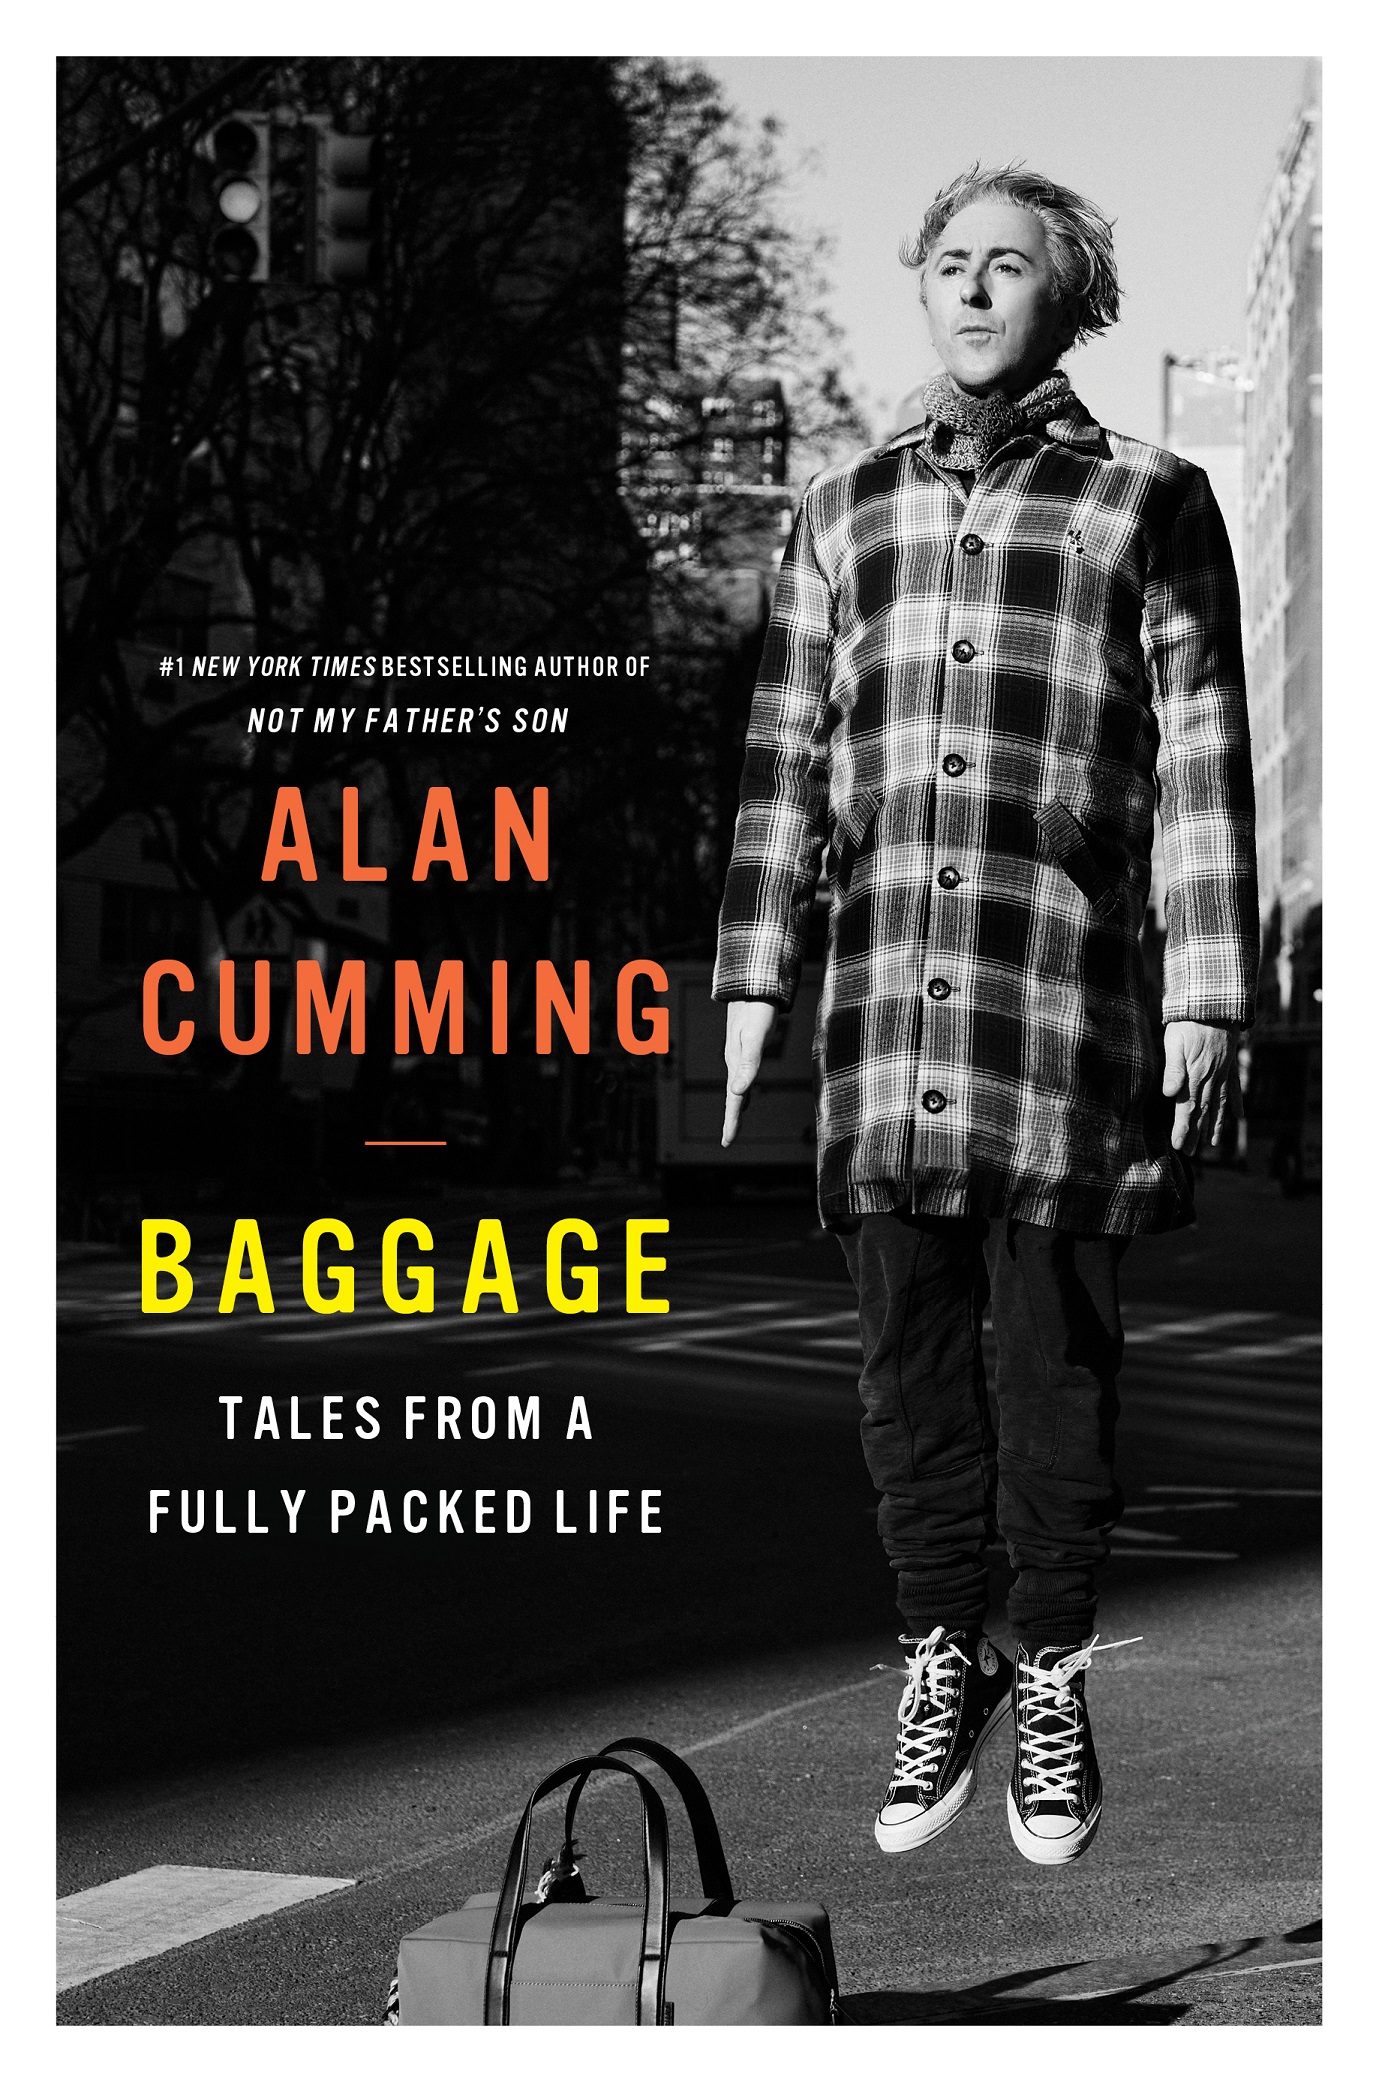 Official U.S. Book Launch: Baggage by Alan Cumming in conversation with Ari Shapiro